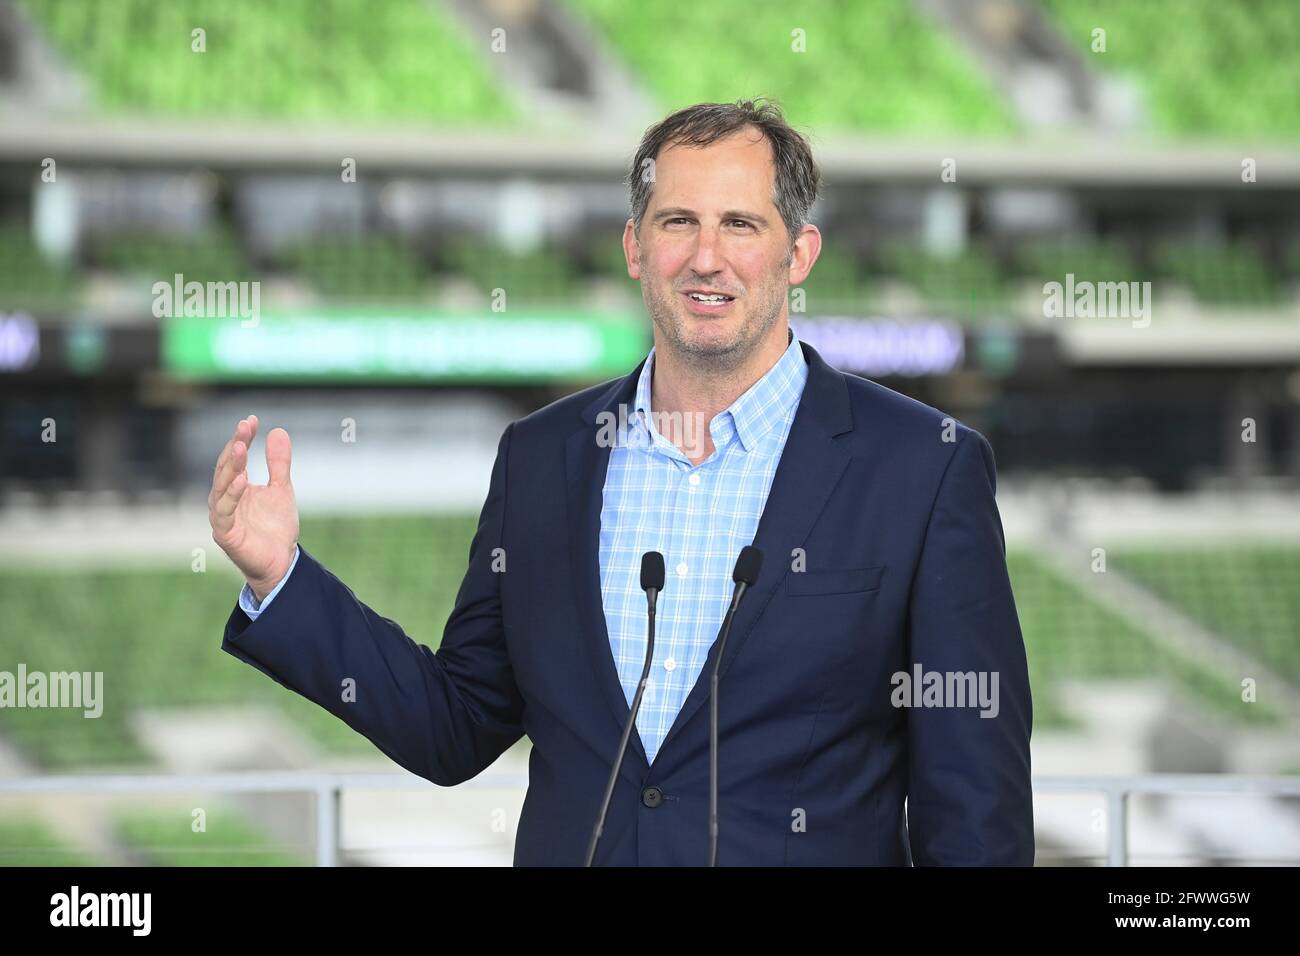 Austin Texas USA, May 24 2021: Austin FC president Andy Loughnane announcess that declining pandemic numbers will allow 100% stadium capacity for Austin's Major League Soccer opening game next month. The new stadium will host the U.S. Soccer Women's National Team in a friendly with Nigeria on June 16th, 2021. Credit: Bob Daemmrich/Alamy Live News Stock Photo